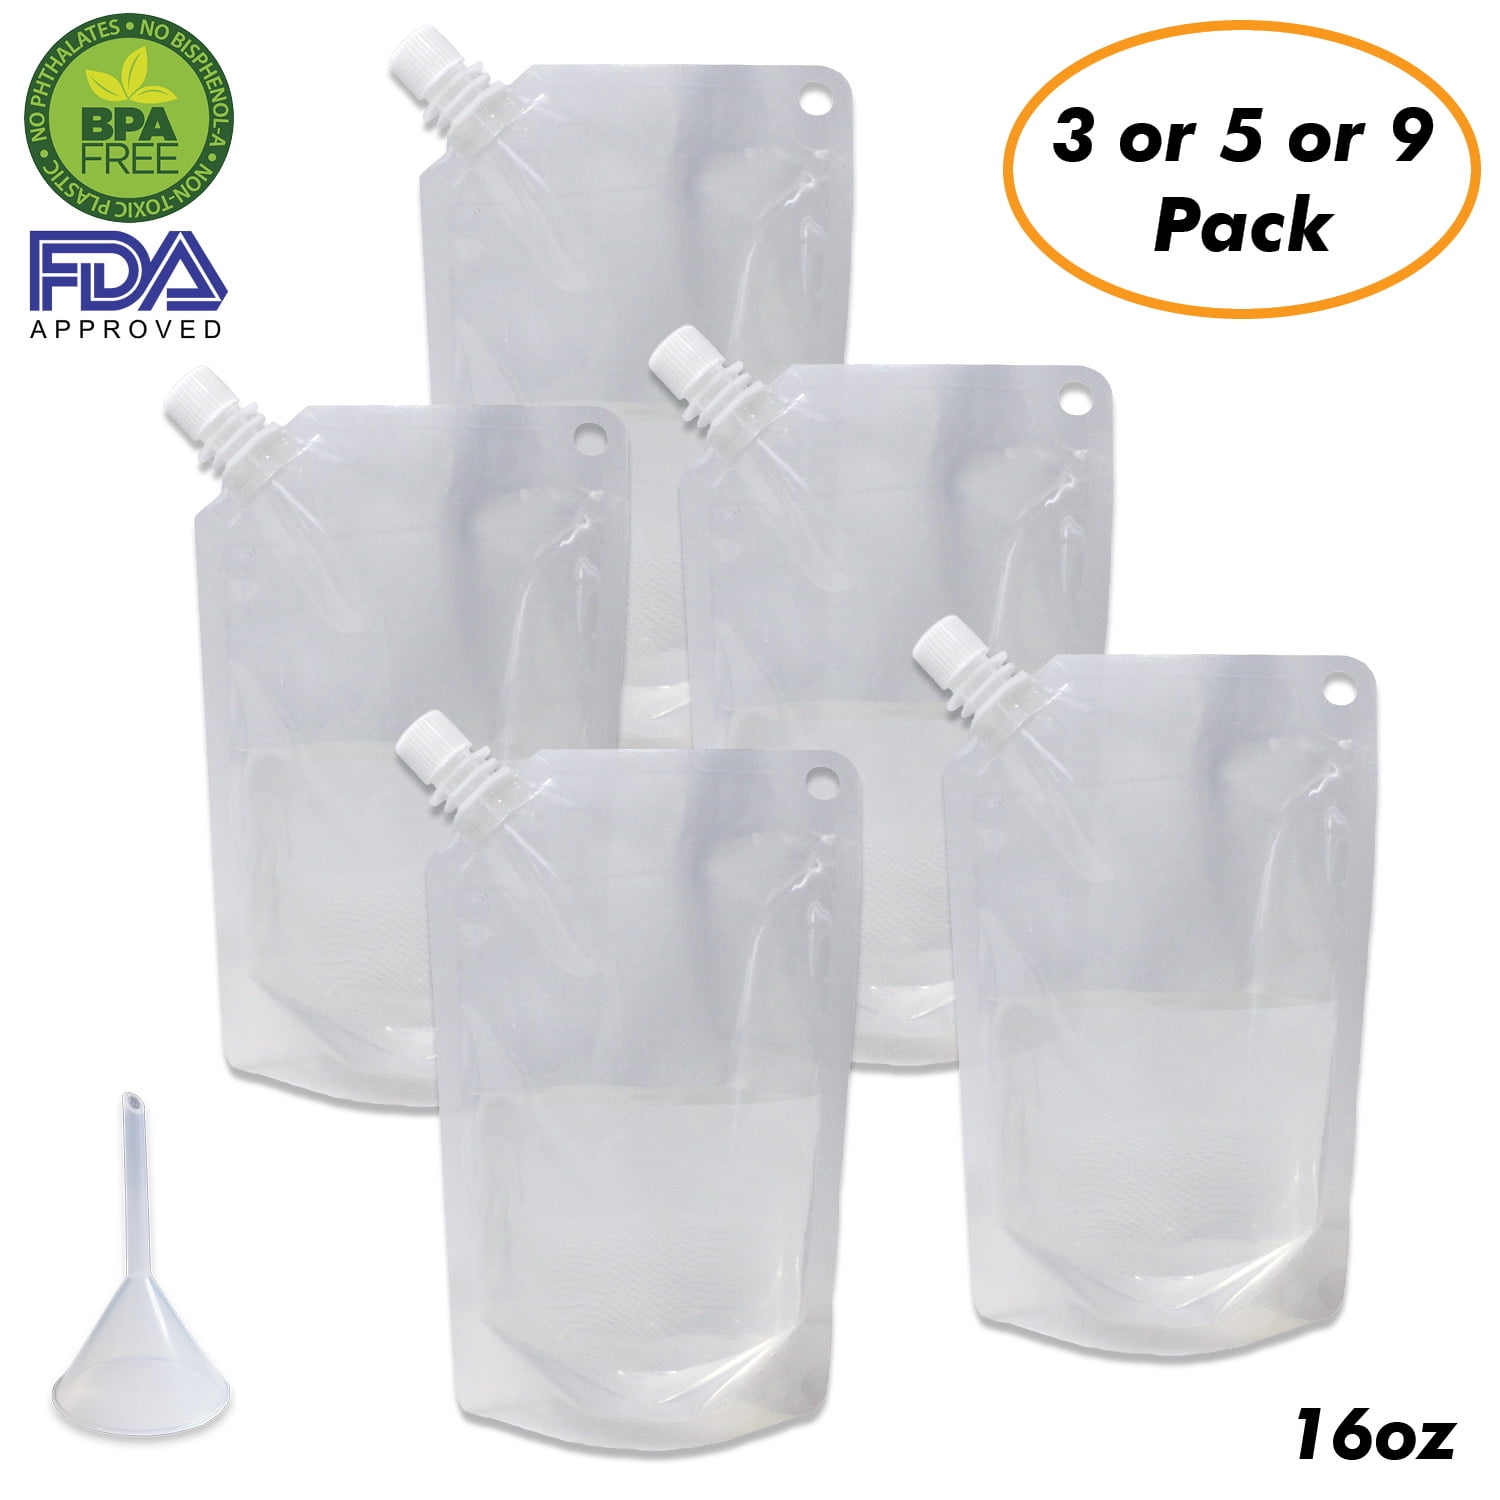 Cruise Ship Flask Kit - Reusable & Concealable Liquor Bags - Sneak or  Smuggle Booze & Alcohol (5x16oz + Funnel Included)